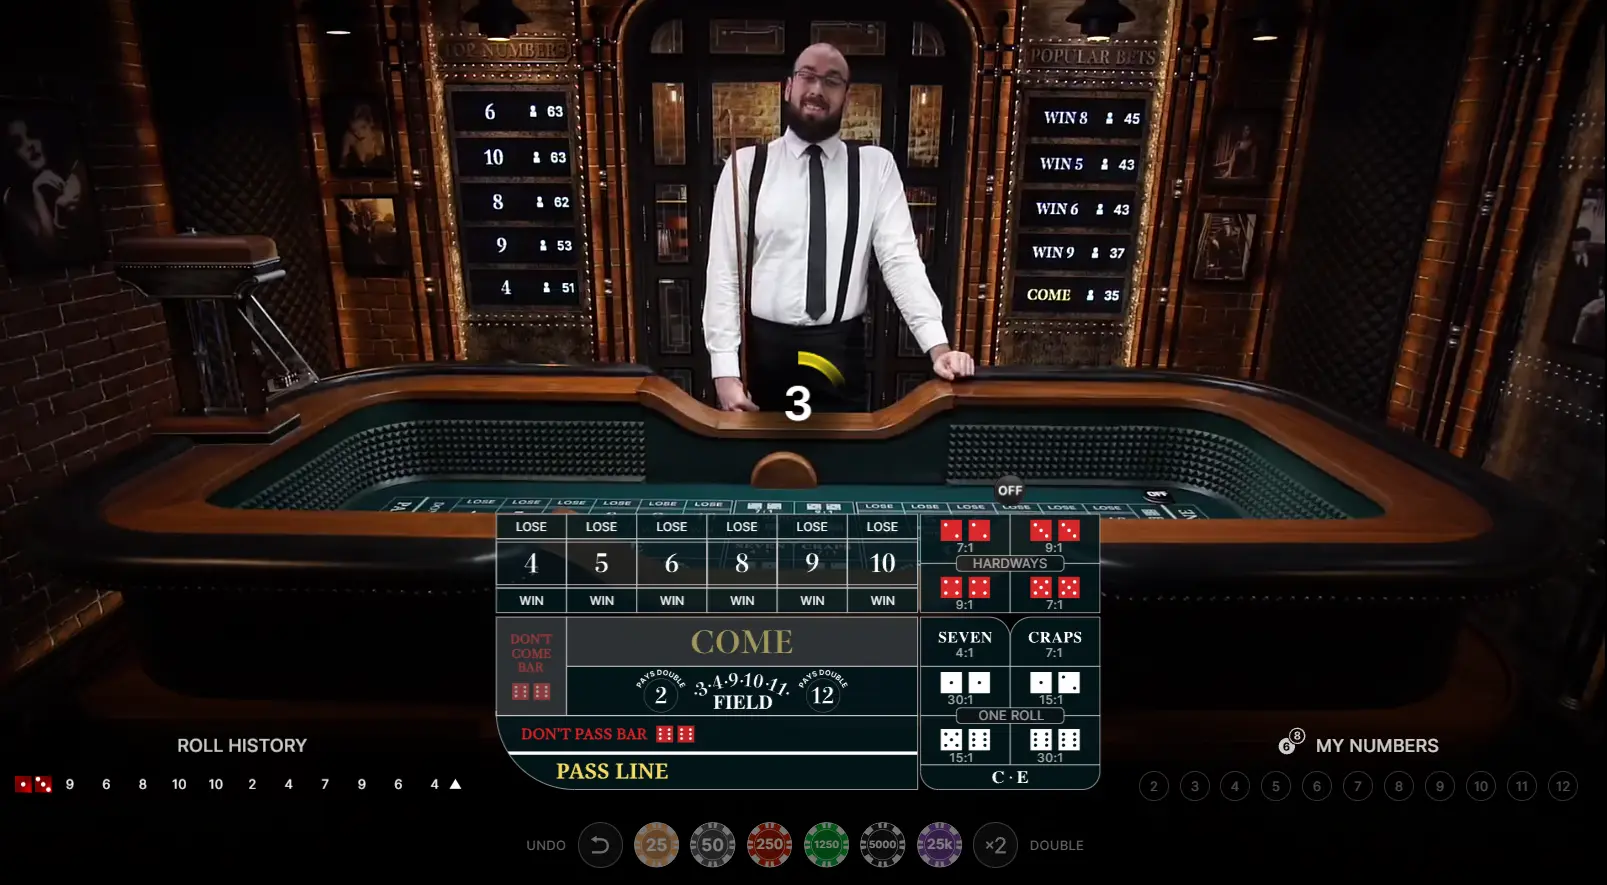 Live online craps aims to deliver that same quintessential craps experience that players know and love